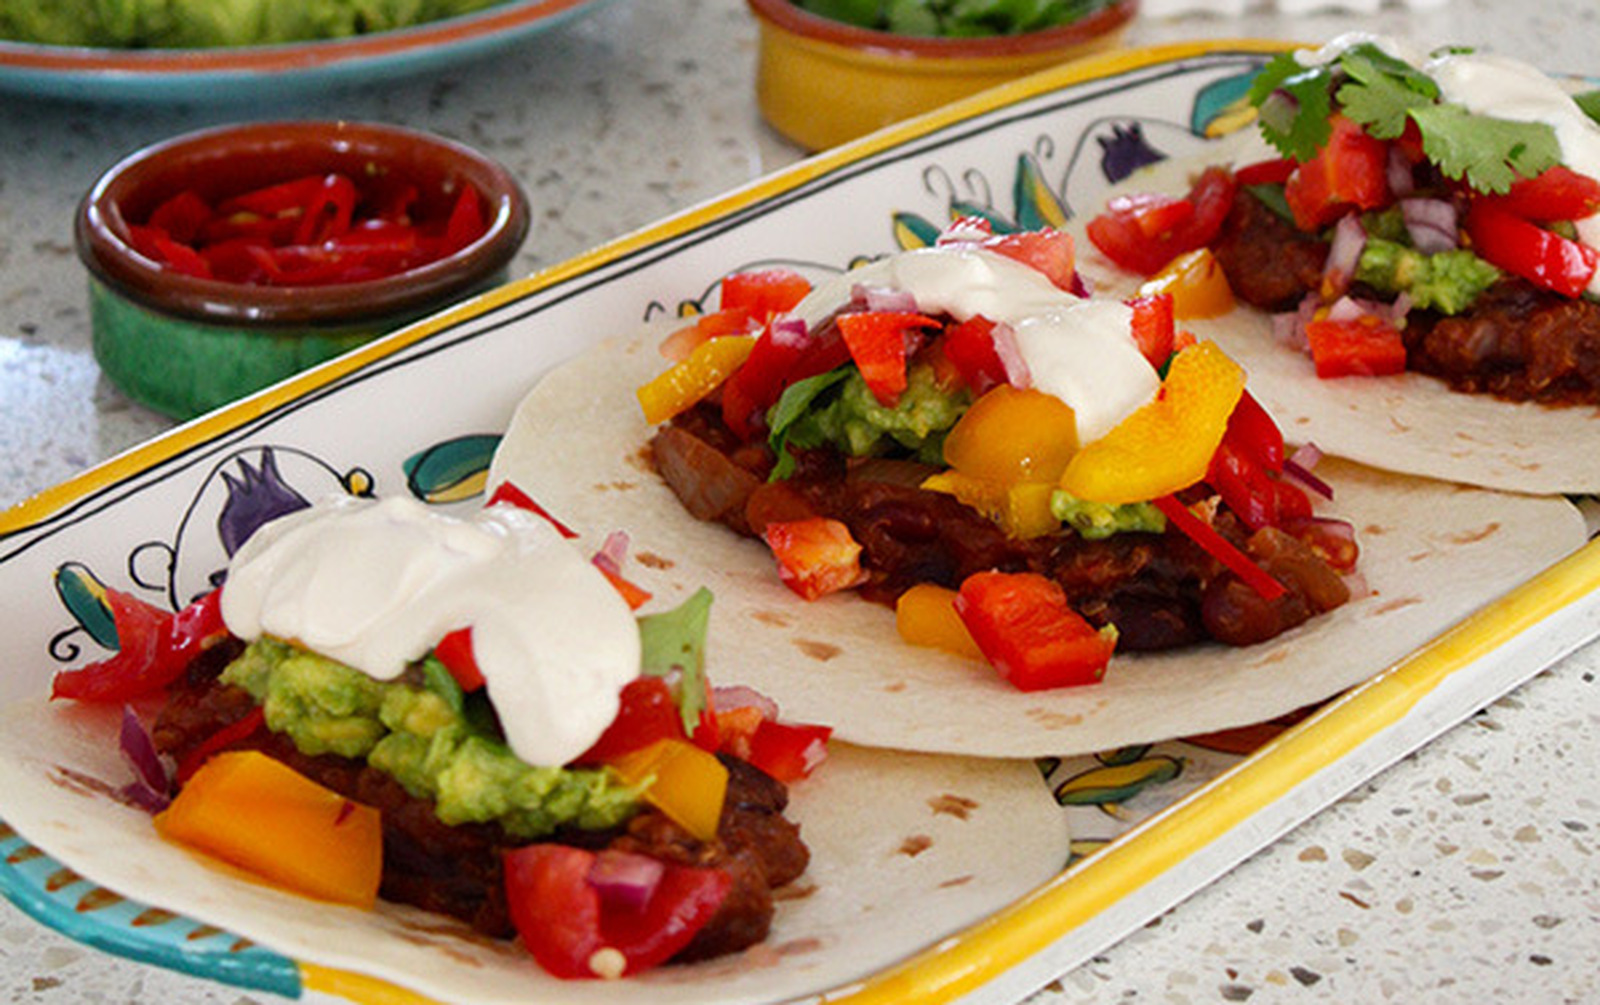 Slow-Cooker Mexican Tacos With Guacamole and Salsa [Vegan, Gluten-Free]